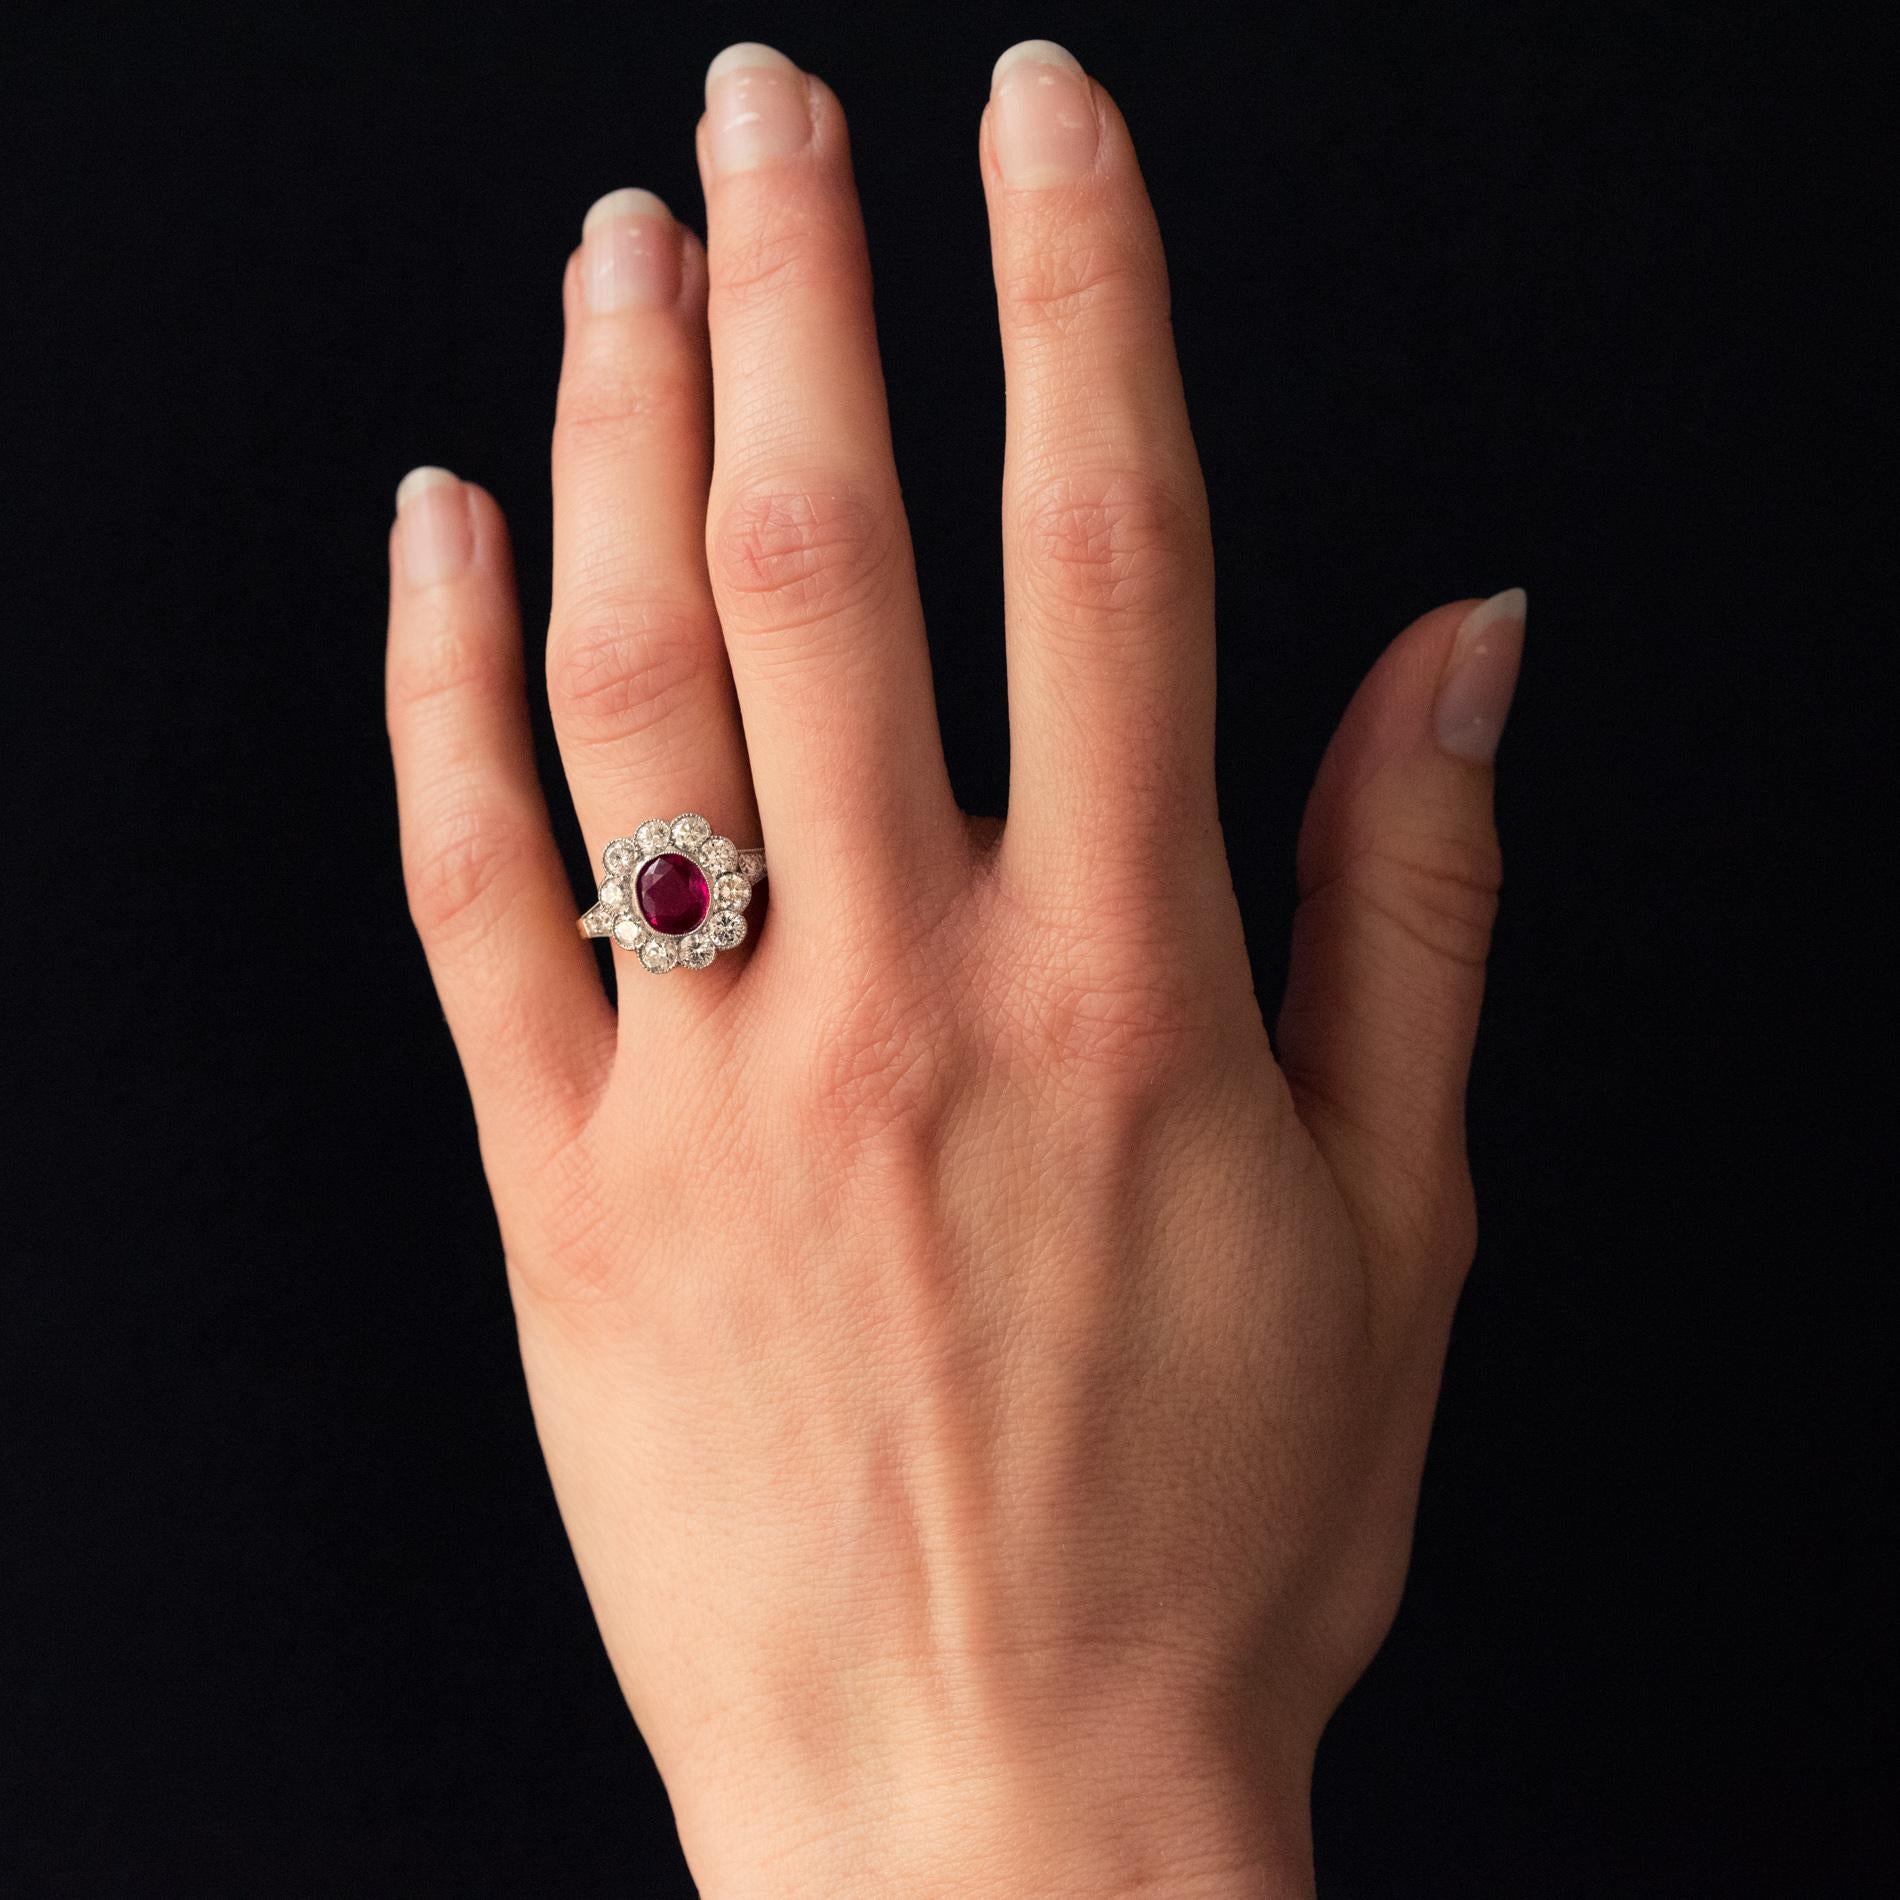 Ring in 18 karat yellow gold, eagle's head hallmark and platinum.
In the shape of a flower, this ring called a daisy is adorned with an oval ruby surrounded by modern brilliant-cut diamonds, all in millegrain settings. On both sides, 2 x 2